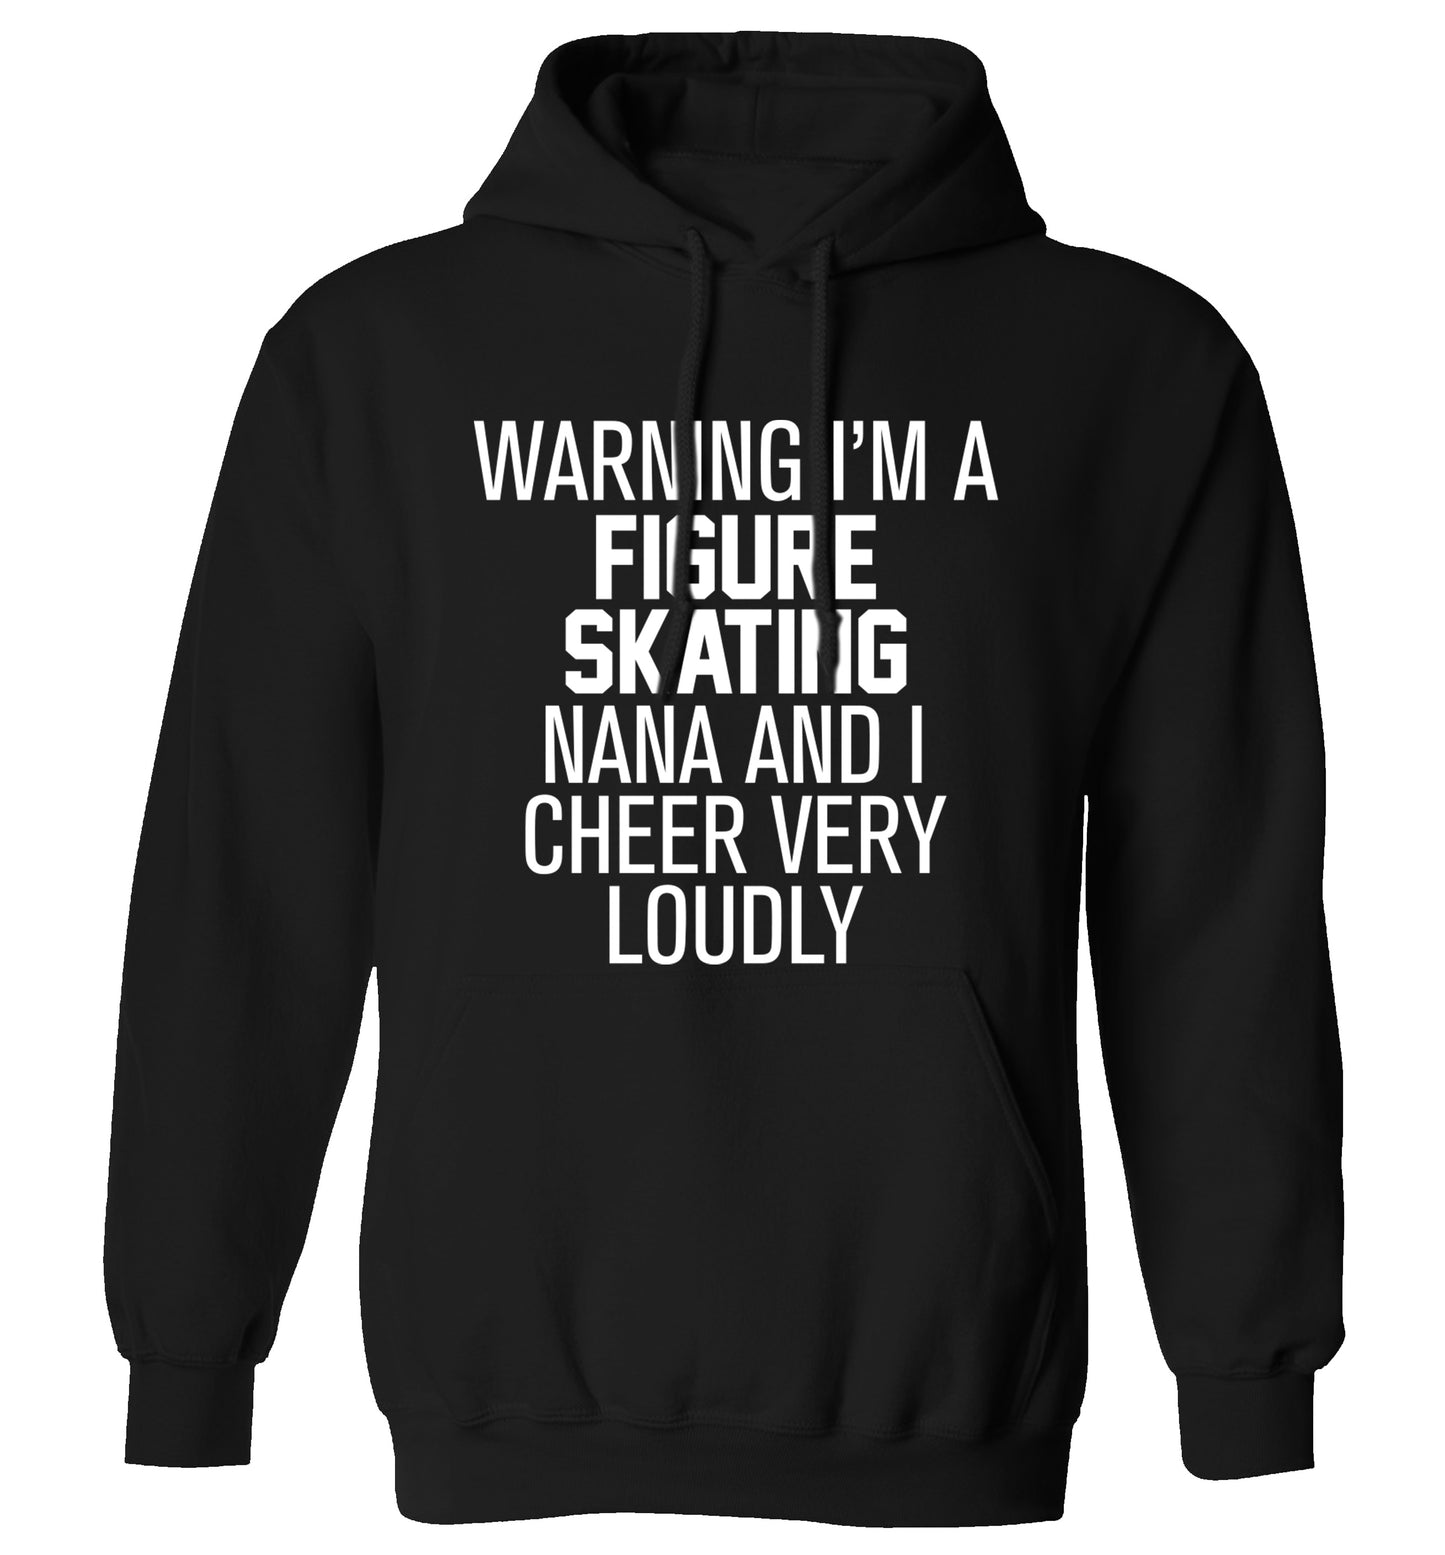 Warning I'm a figure skating nana and I cheer very loudly adults unisexblack hoodie 2XL